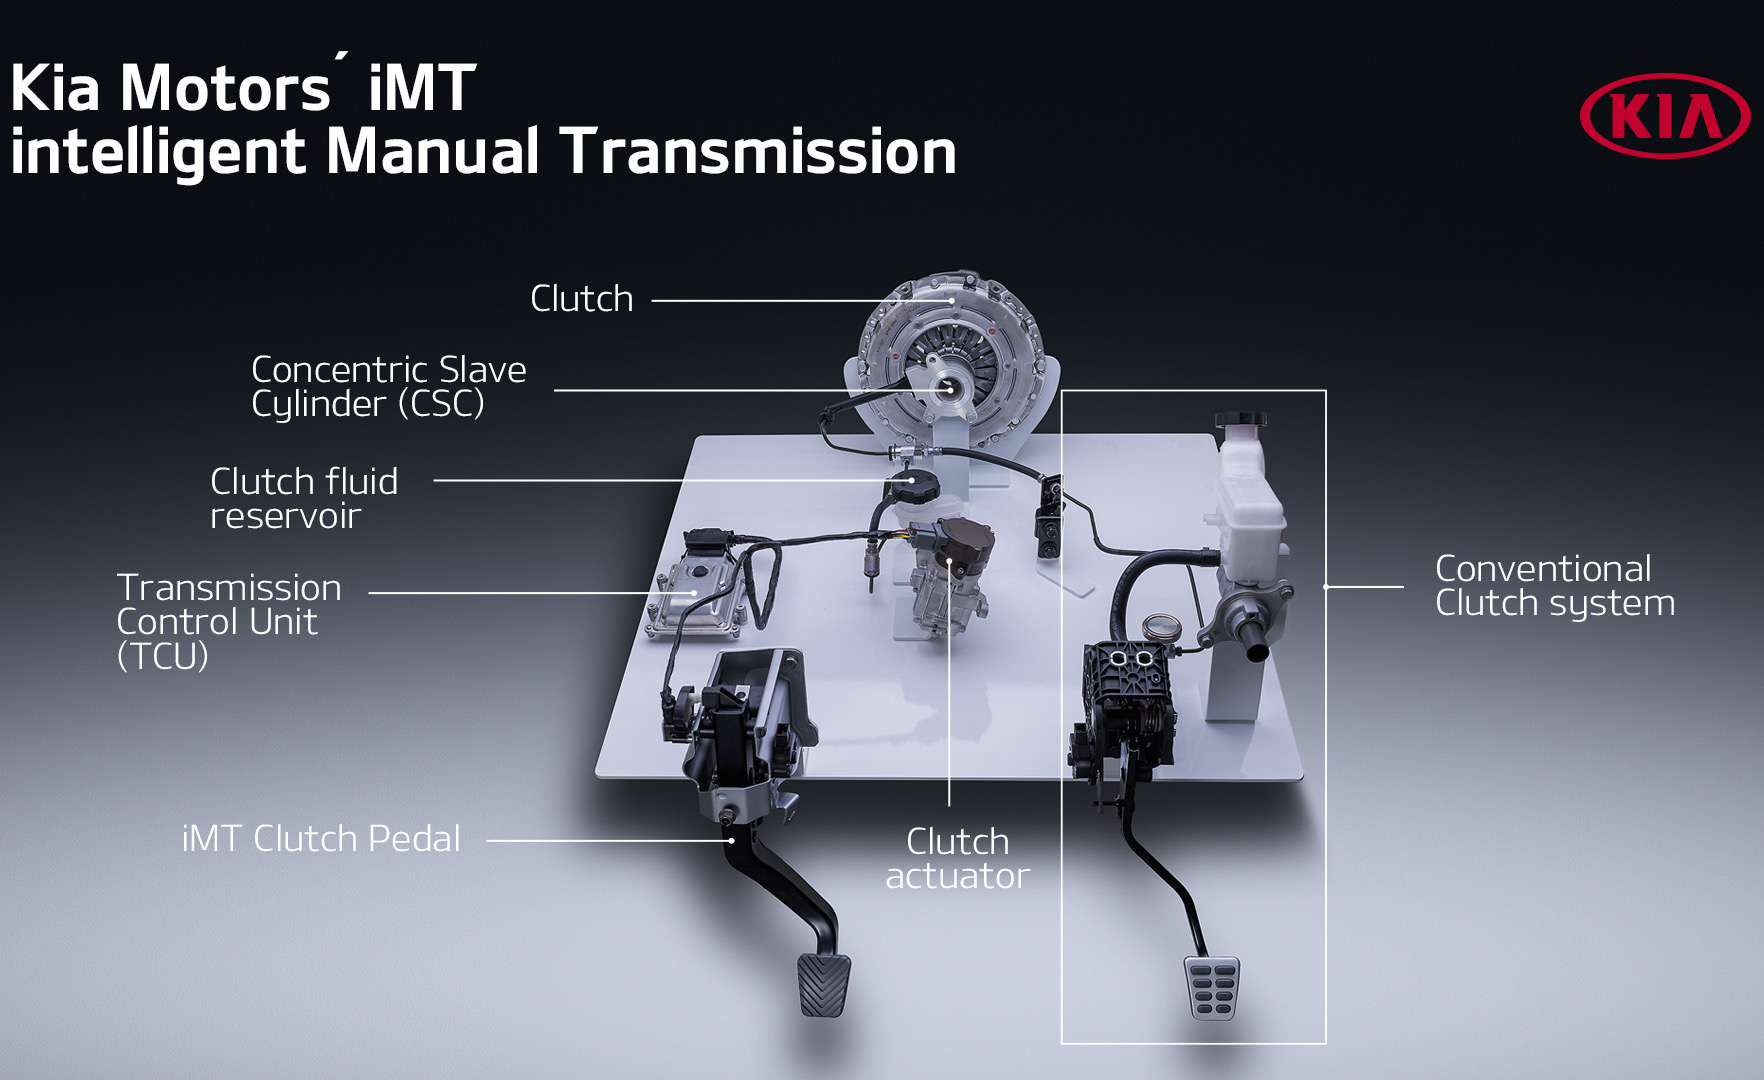 Kia develops clever clutch-by-wire iMT manual transmission